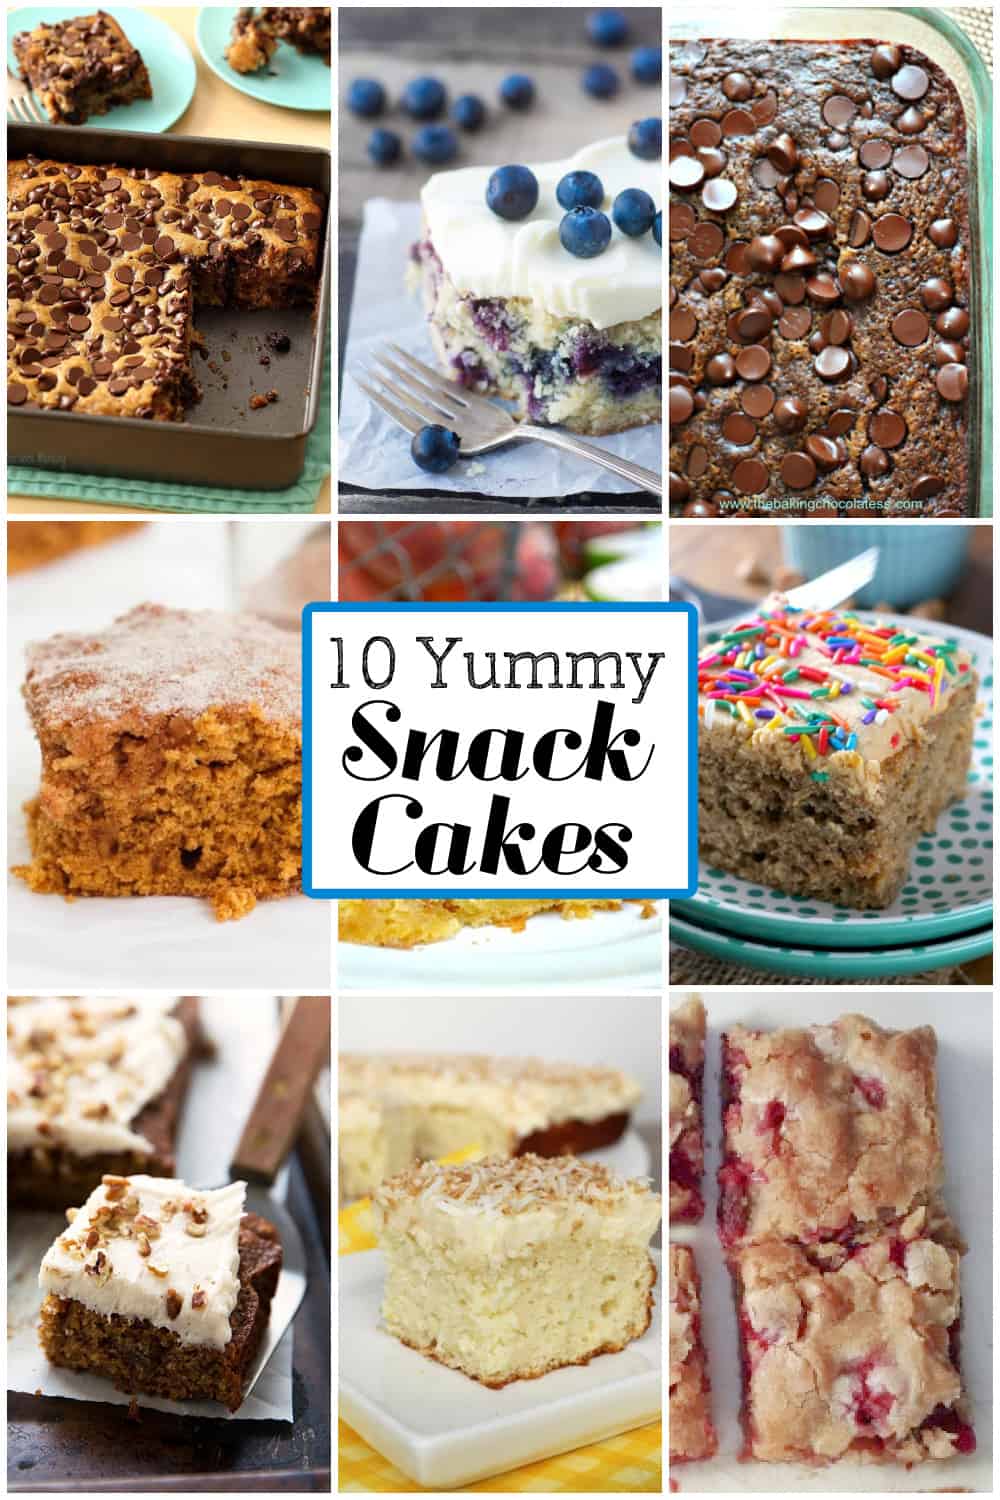 10 Yummy Snack Cakes To Try - The Baking ChocolaTess